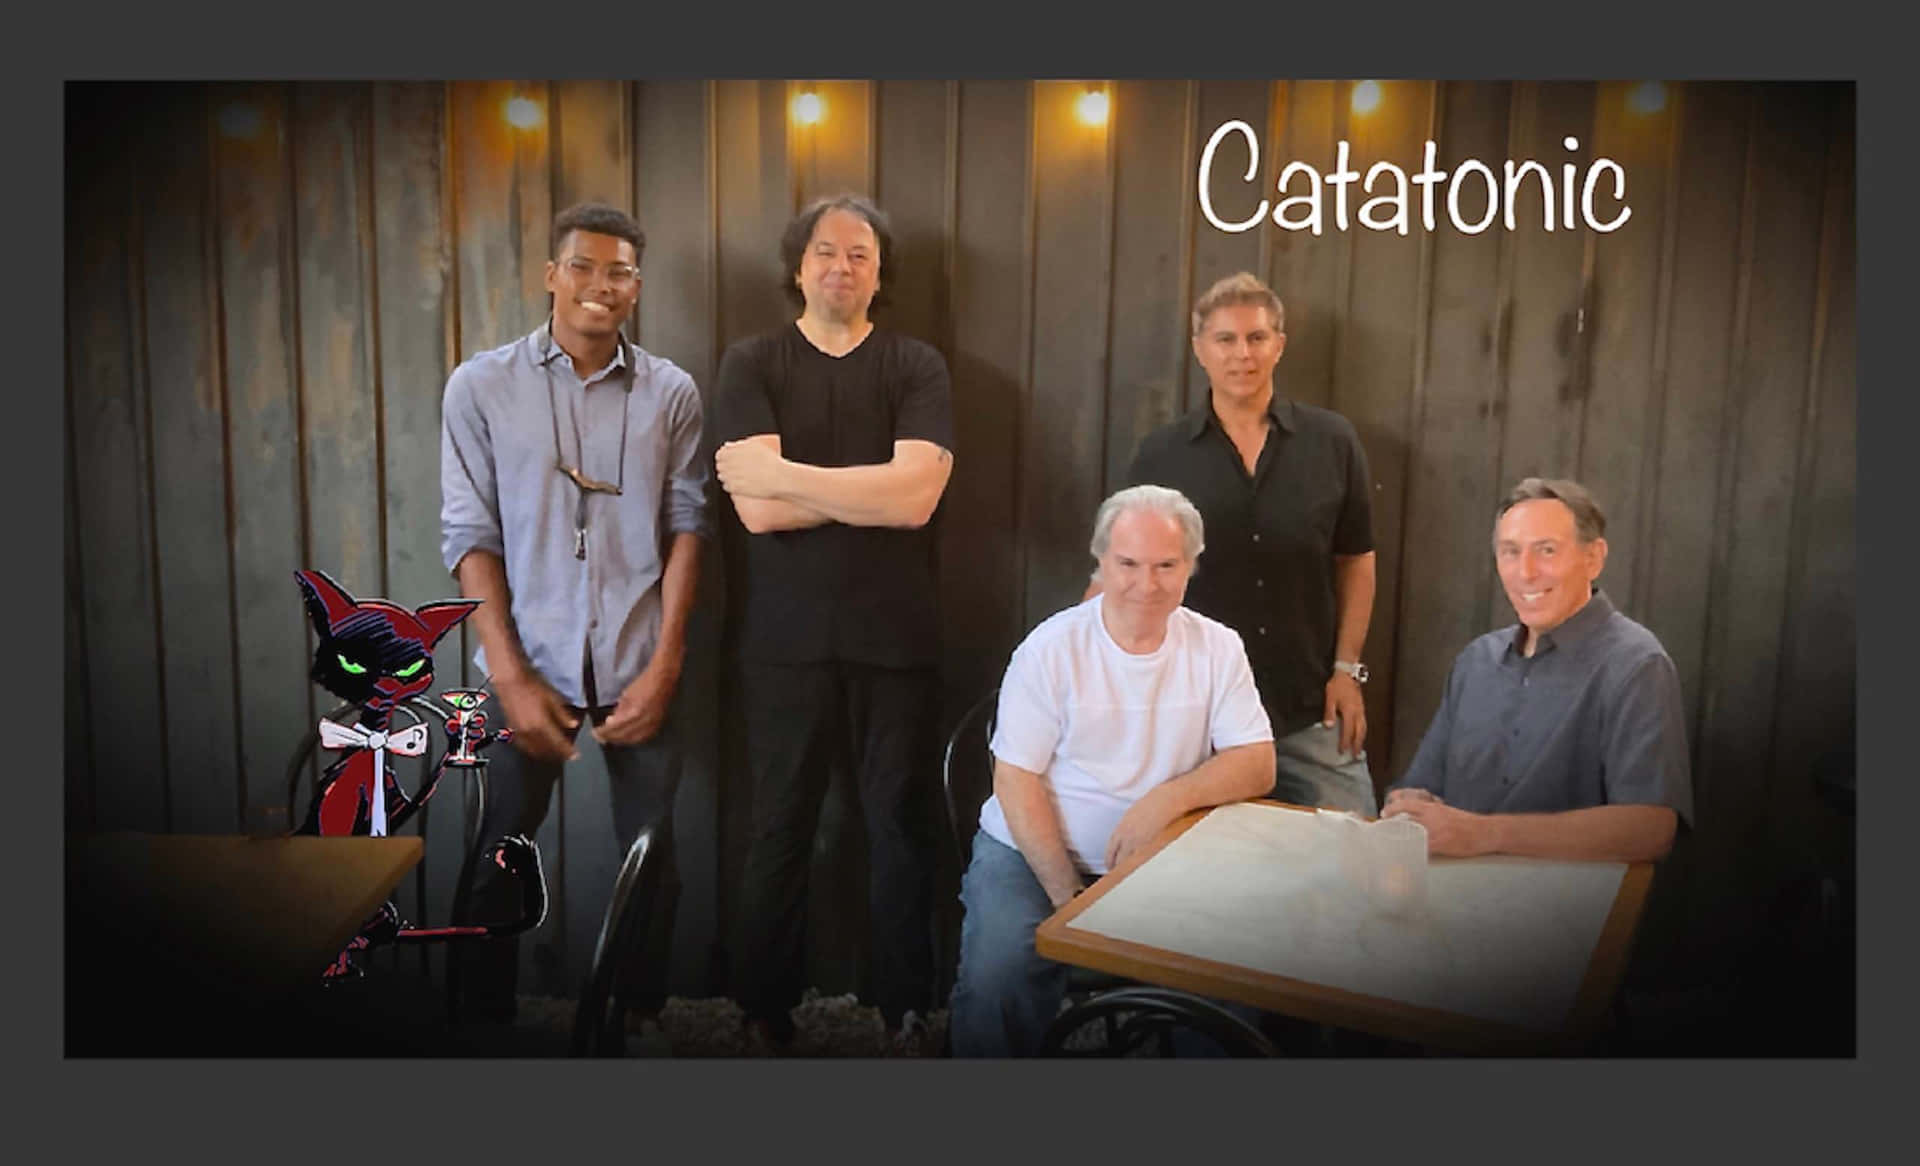 Catatonic Band And A Cat Background